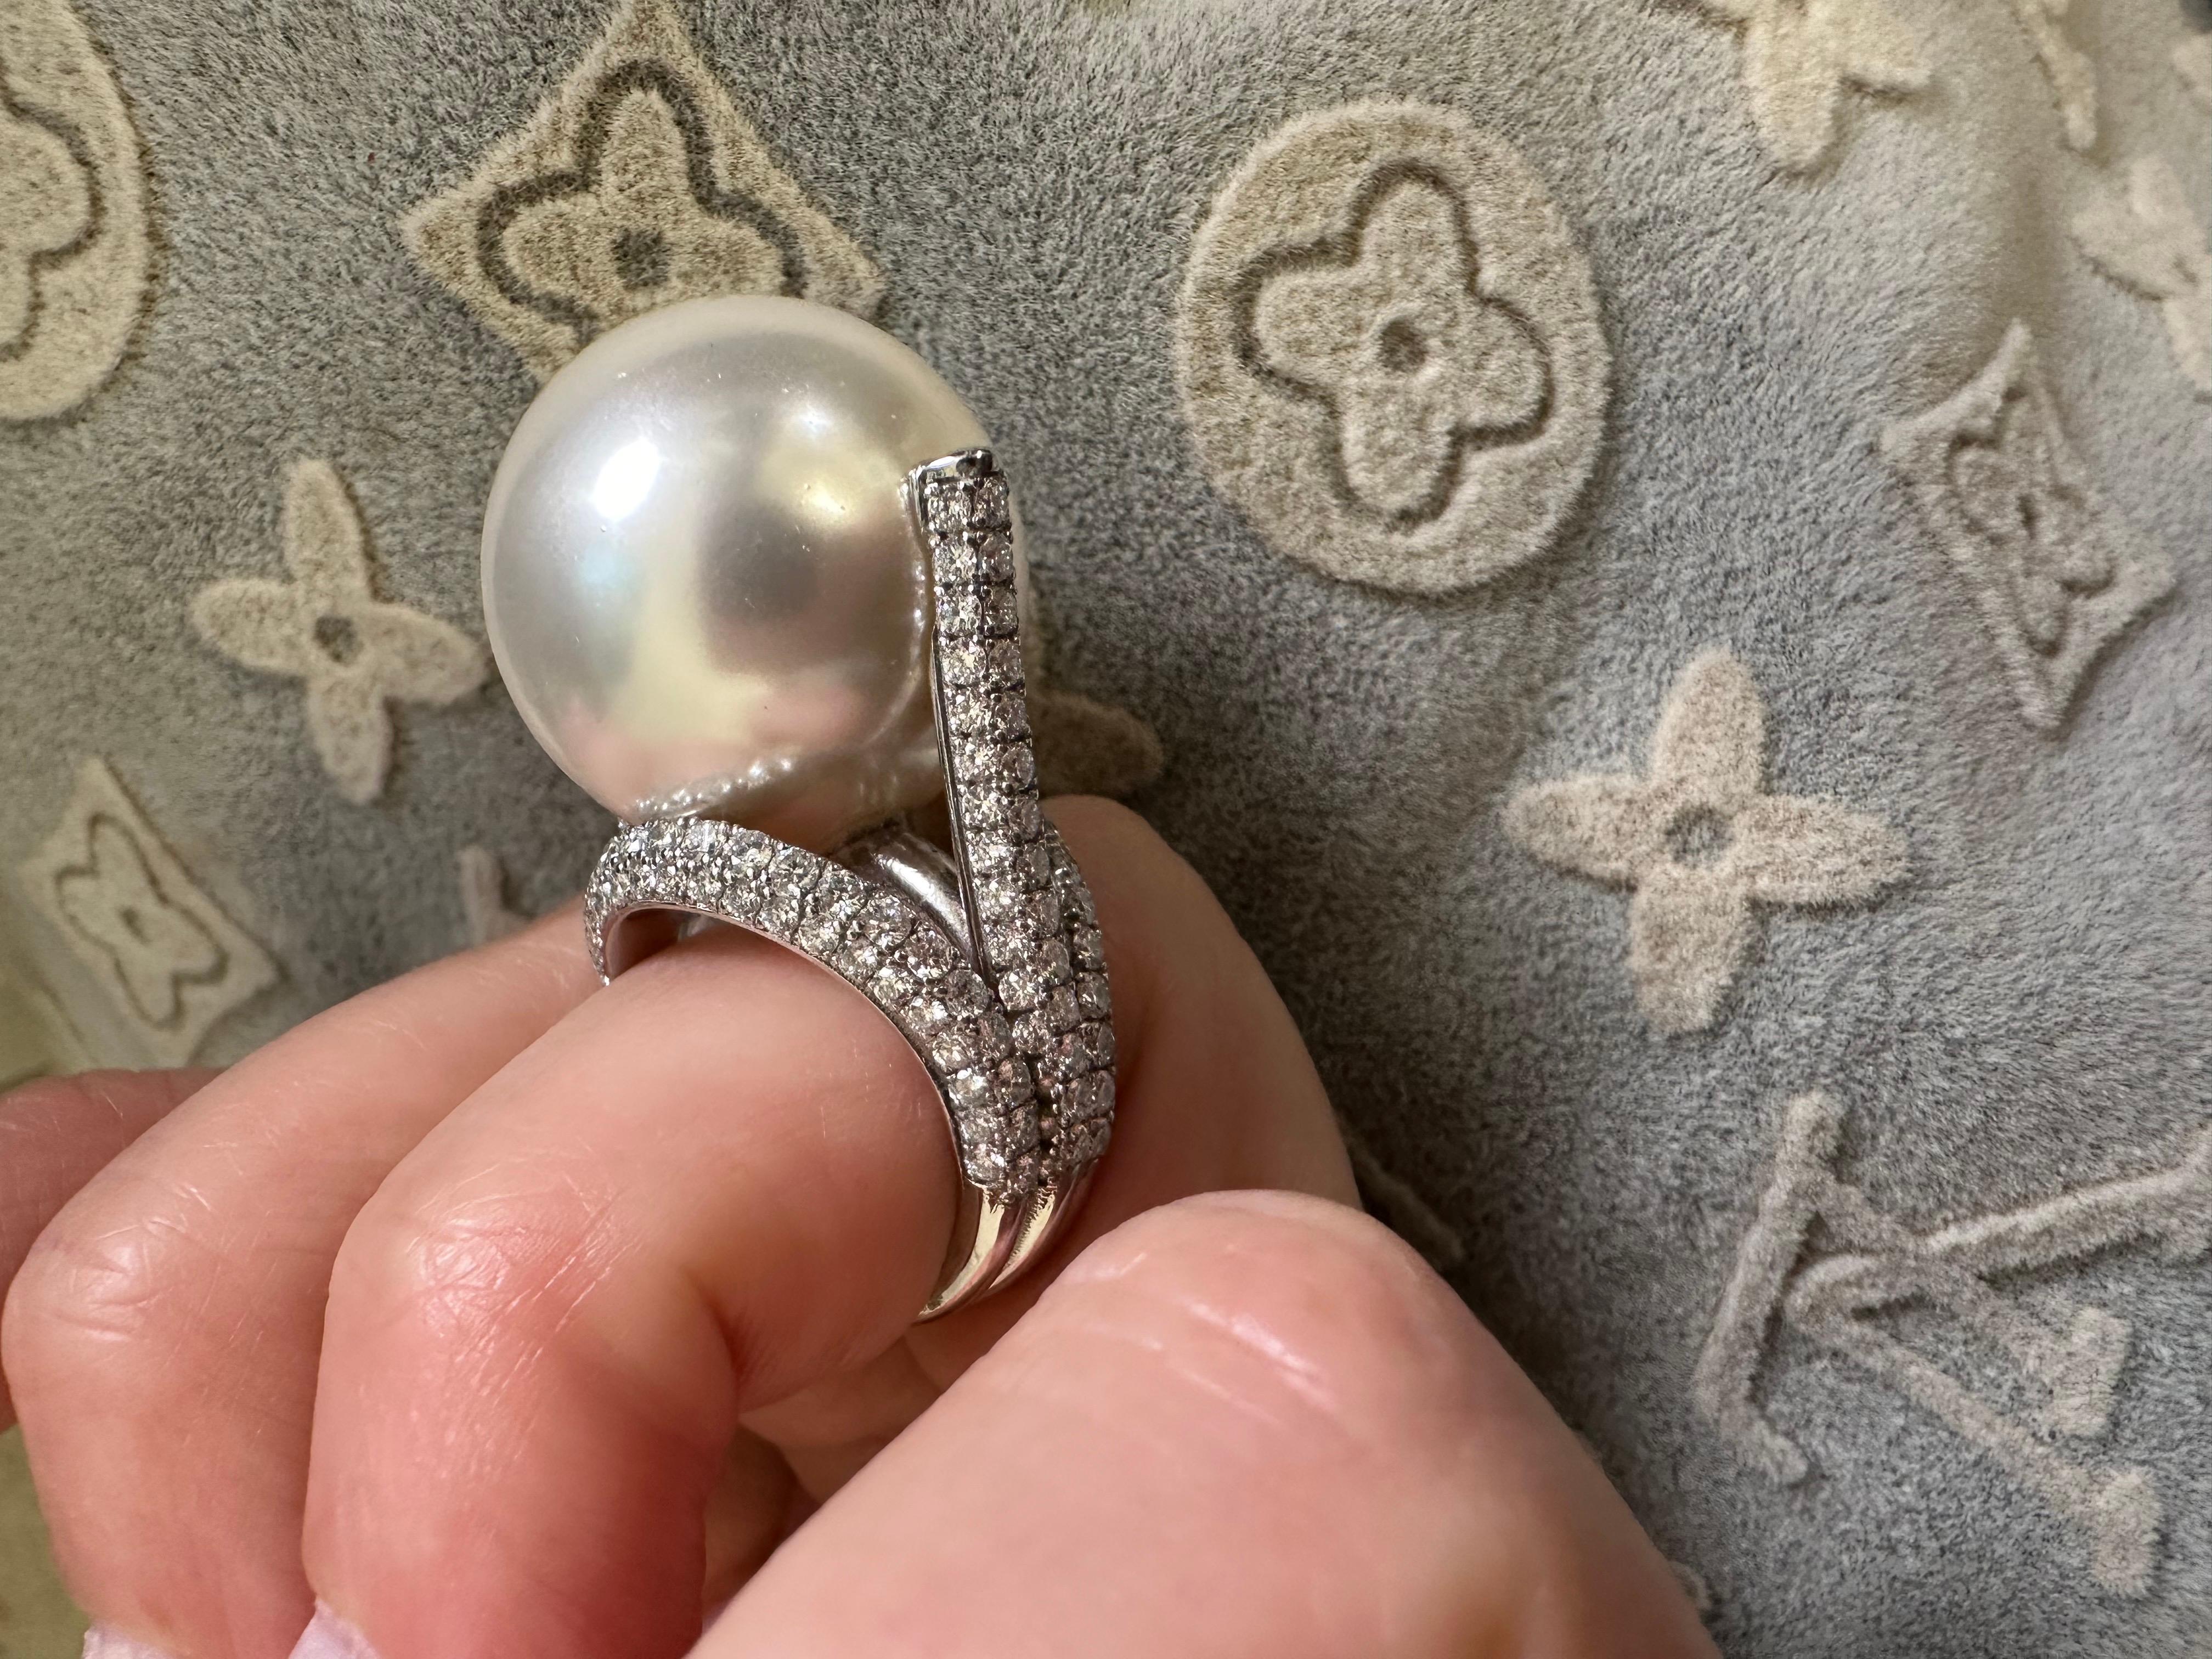 Extraordinary diamond ring with a shell pearl . Over 2 carats of diamonds pave set to perfection in 18KT white gold, stunning luxurios cocktail ring for that perfect black dress!

Shell pearl 20mm:
Color: White
Cut: Round

Natural Diamond(s):